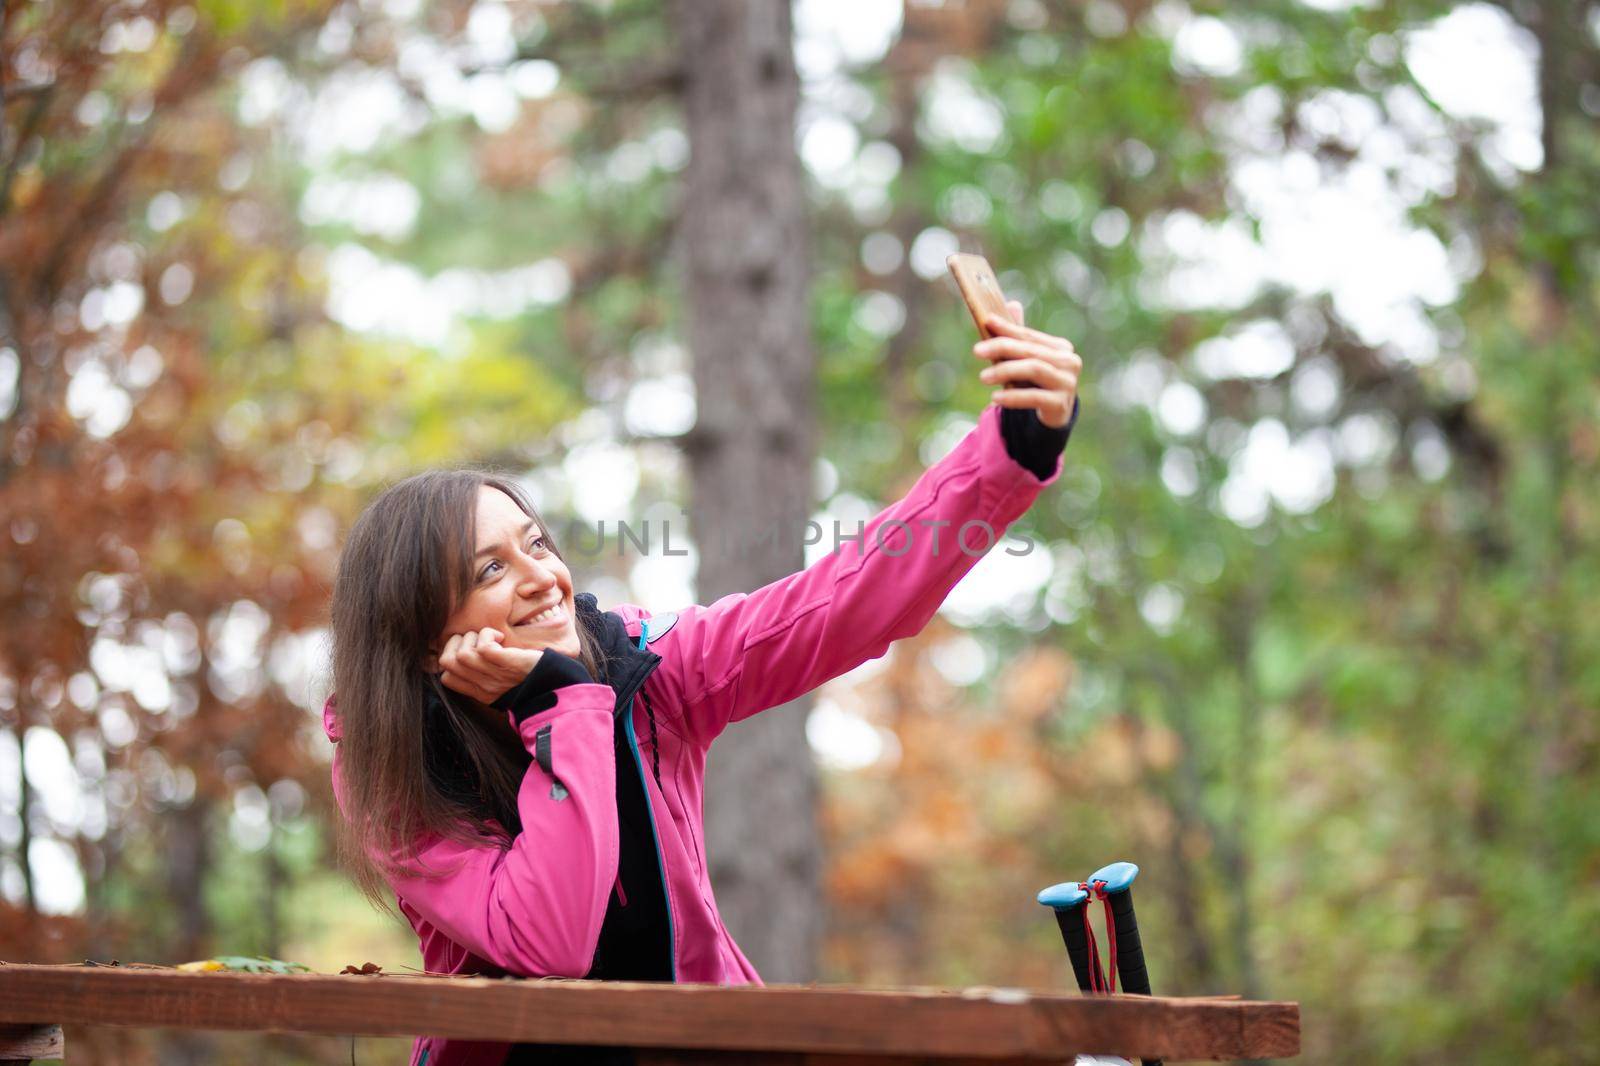 Hiker girl resting on a bench in the forest. Backpacker with pink jacket taking selfie with smartphone. by kokimk